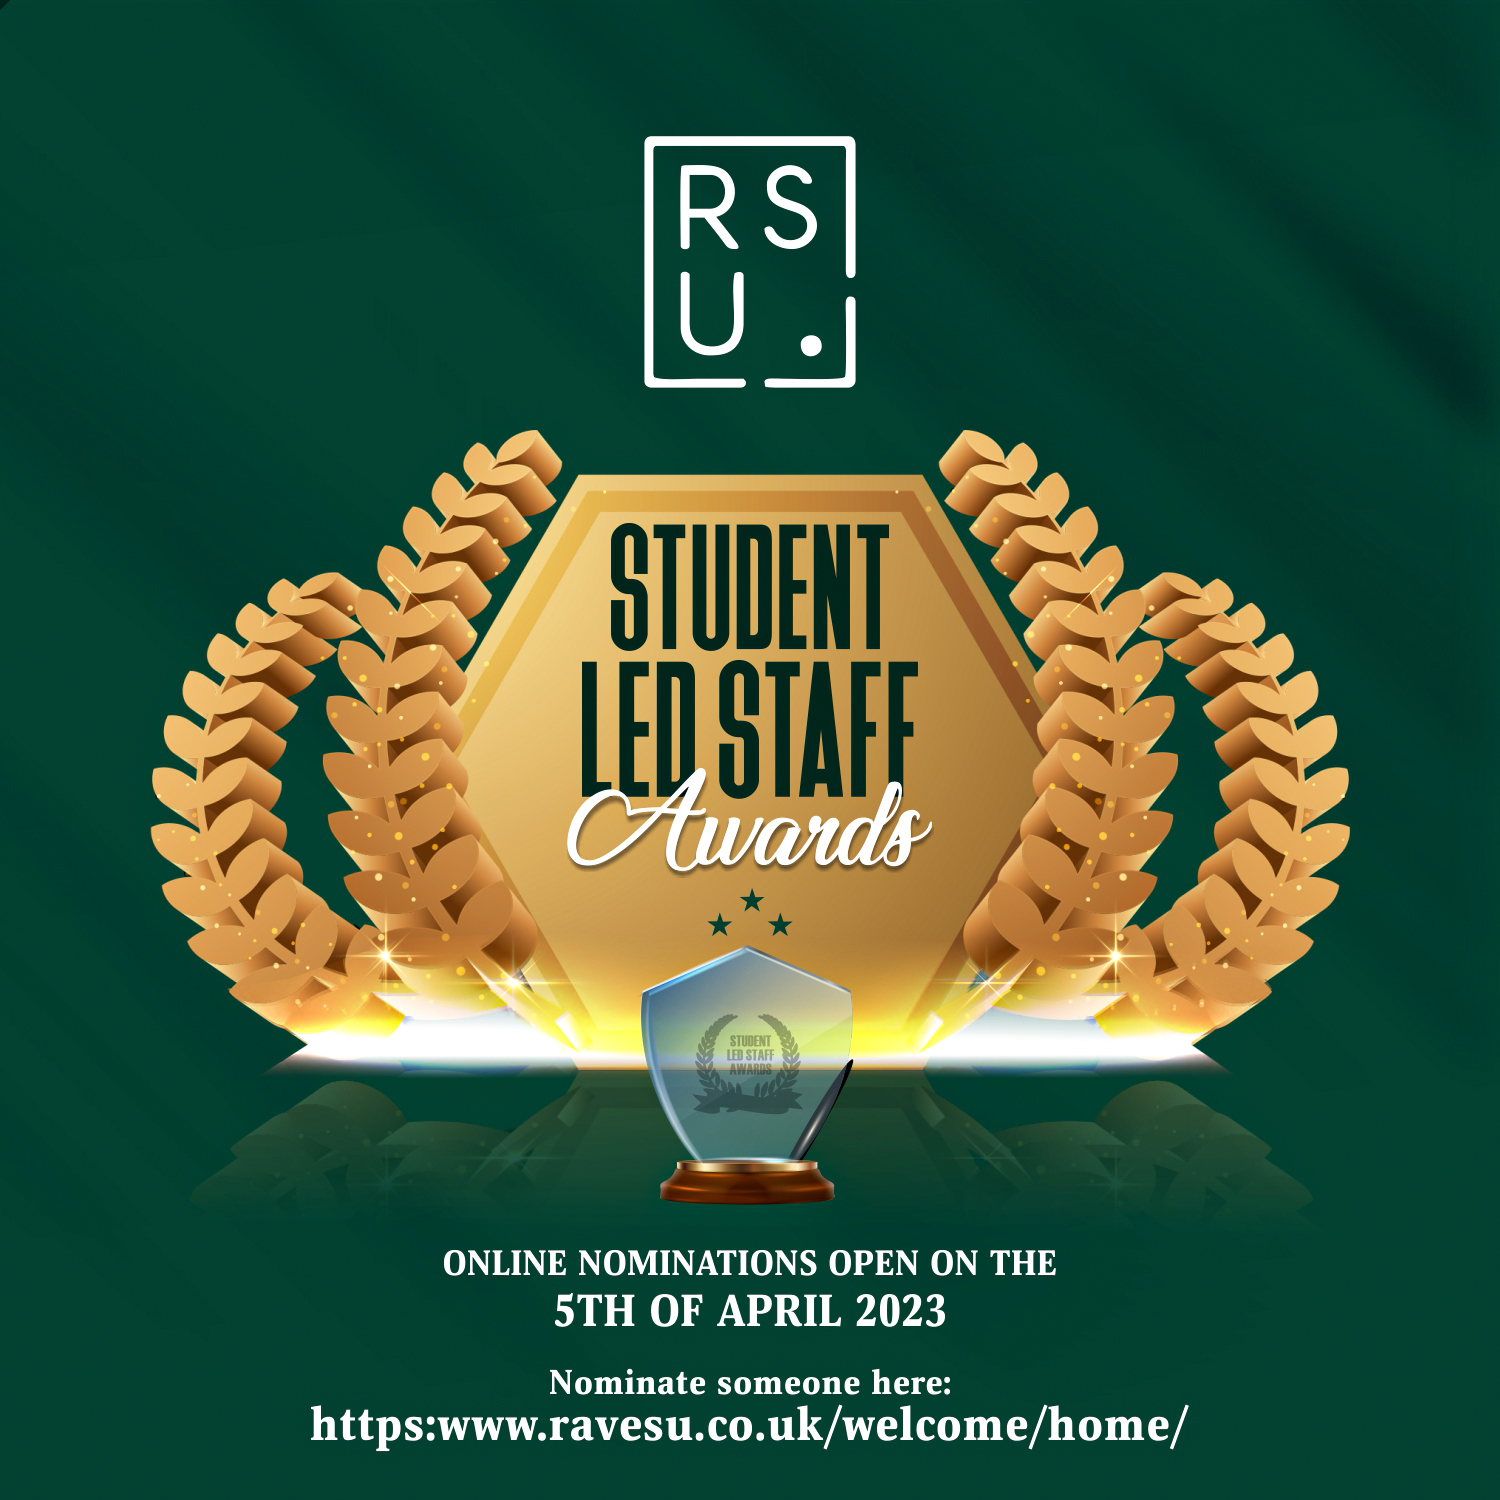 A graphic showing the branding for Student Led Staff Awards, a golden laurel on a dark green background